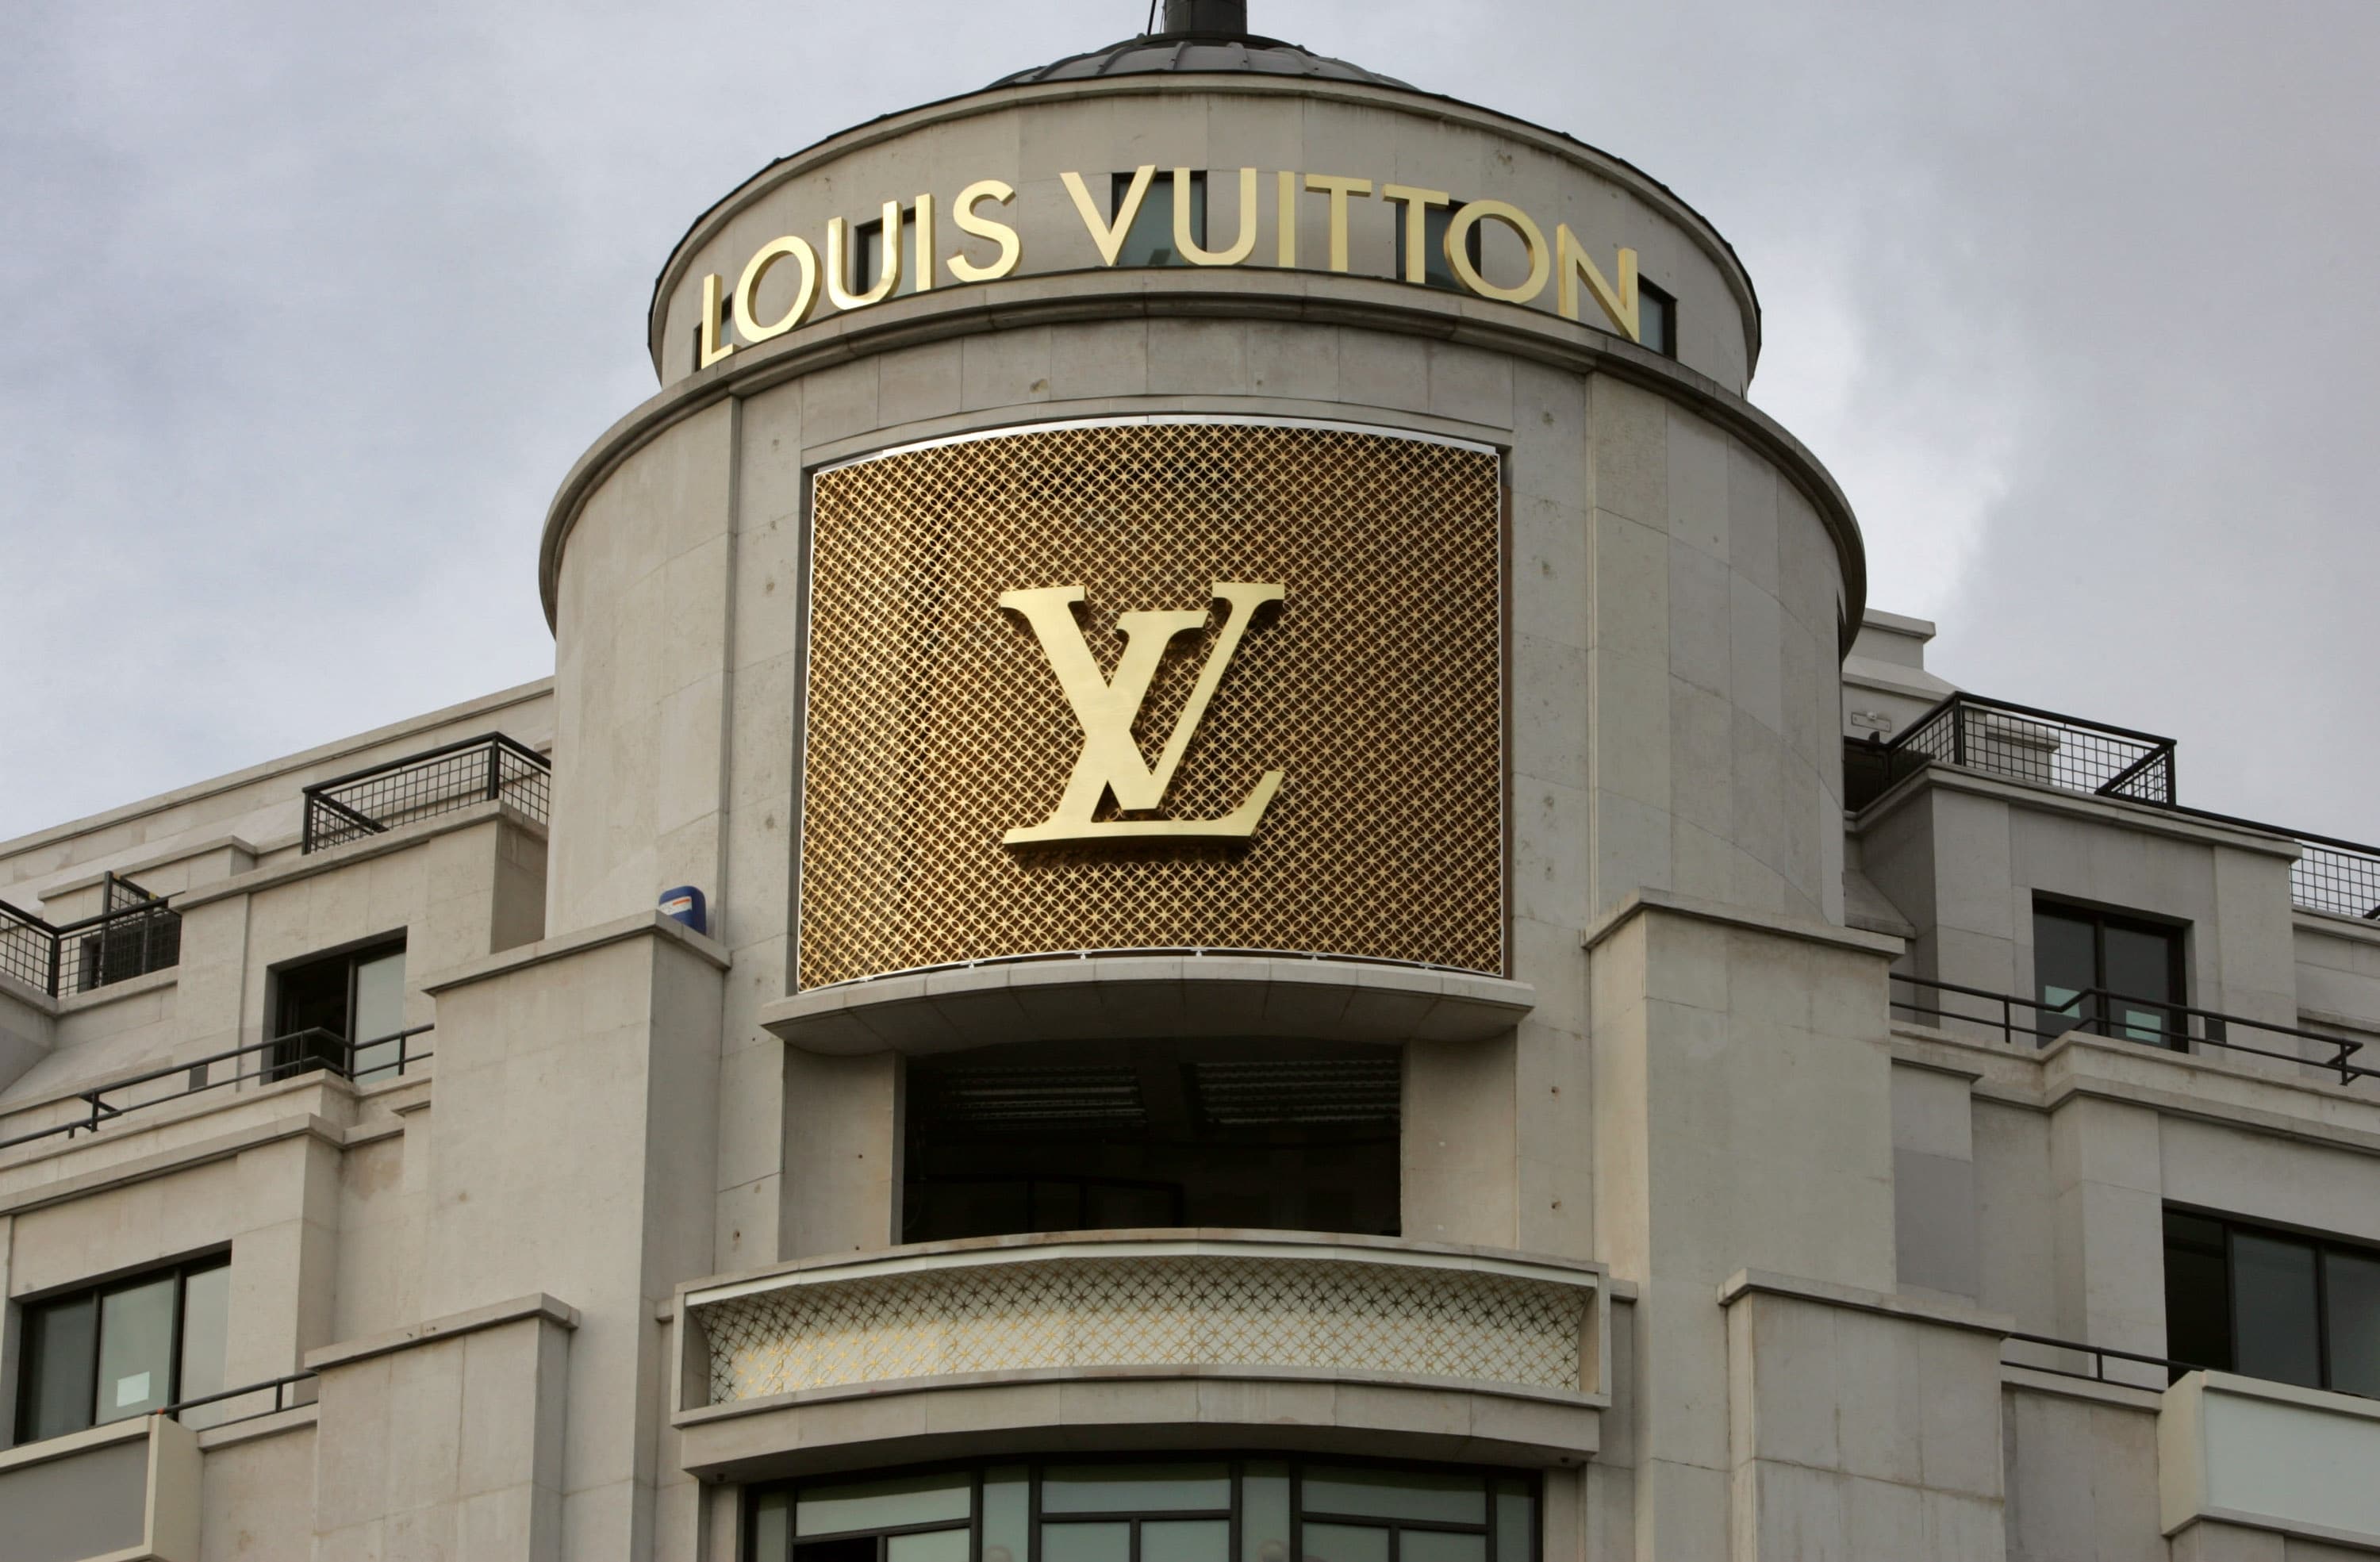 Stock market: The CAC 40 continues to rise, driven by the LVMH group -  Luxus Plus